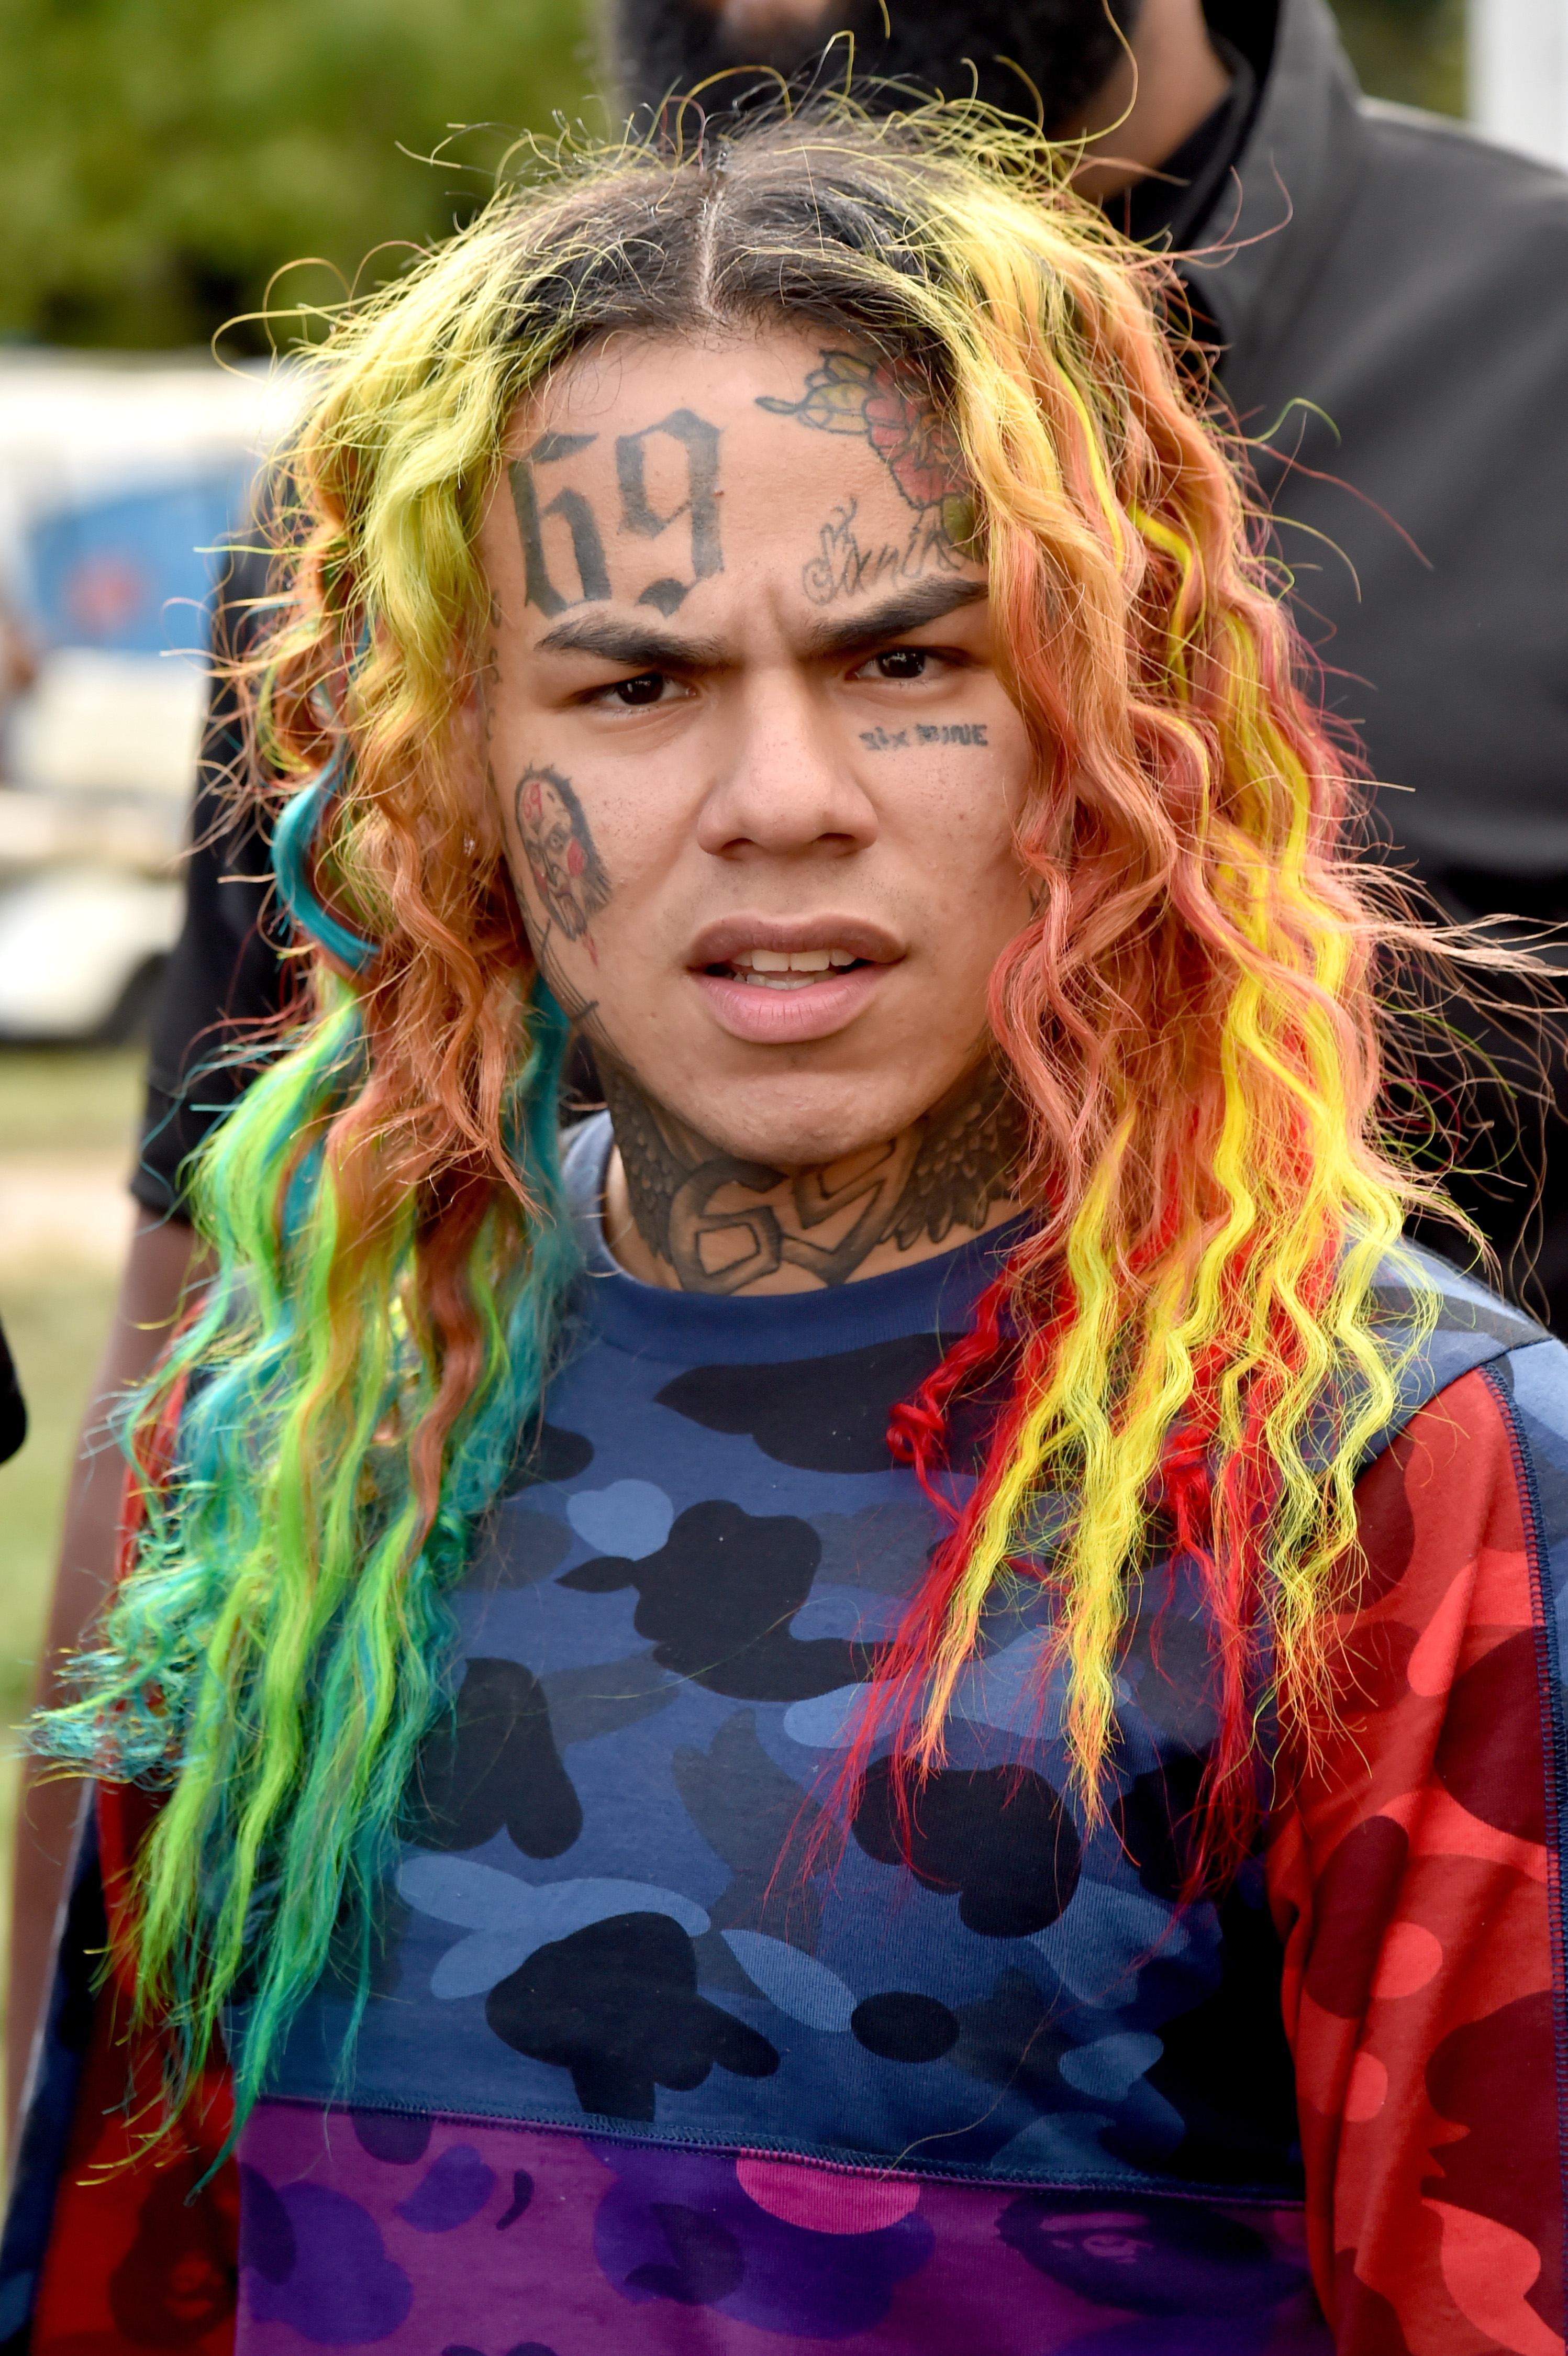 #TSRUpdatez: Tekashi69 Hit With 17-Count Indictment, Facing Up To Life In Prison - The ...